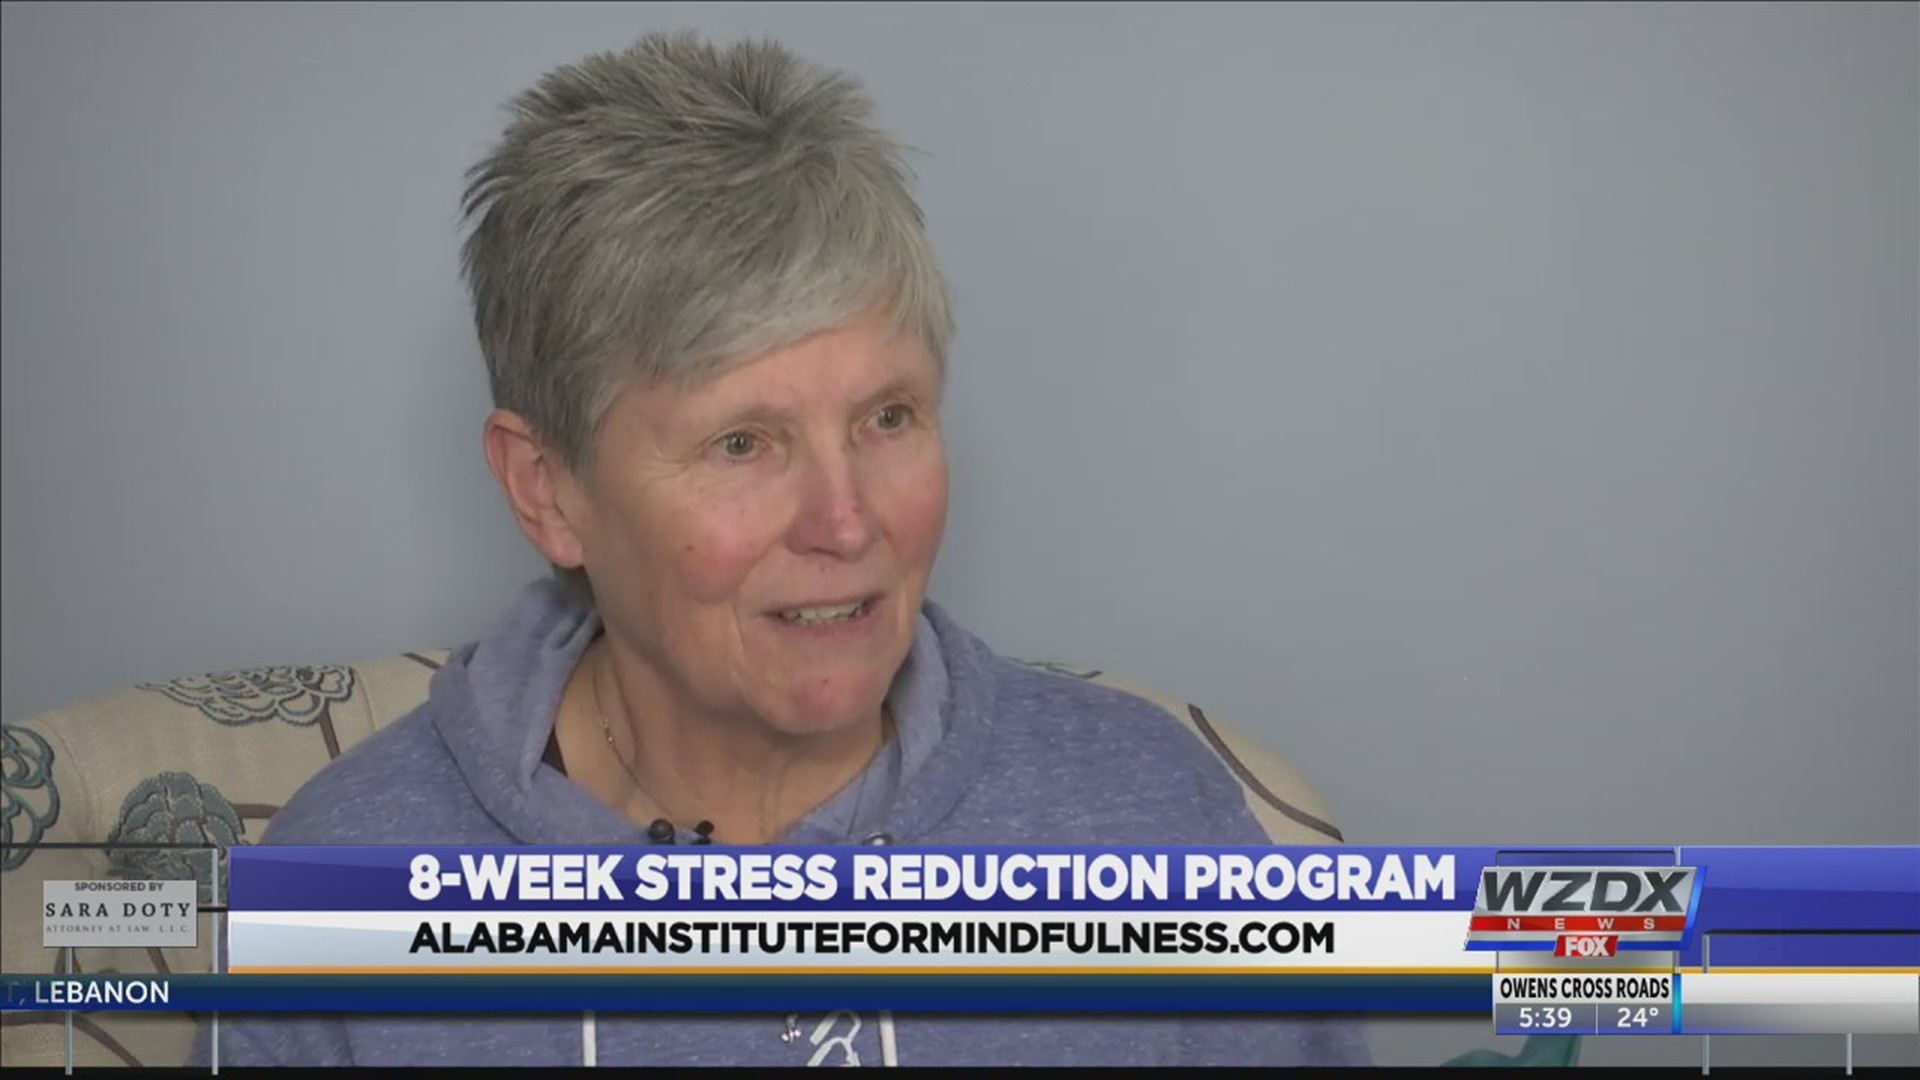 Alabama Institute for Mindfulness is offering an 8-week program that will help individuals learn how to embrace their emotions.